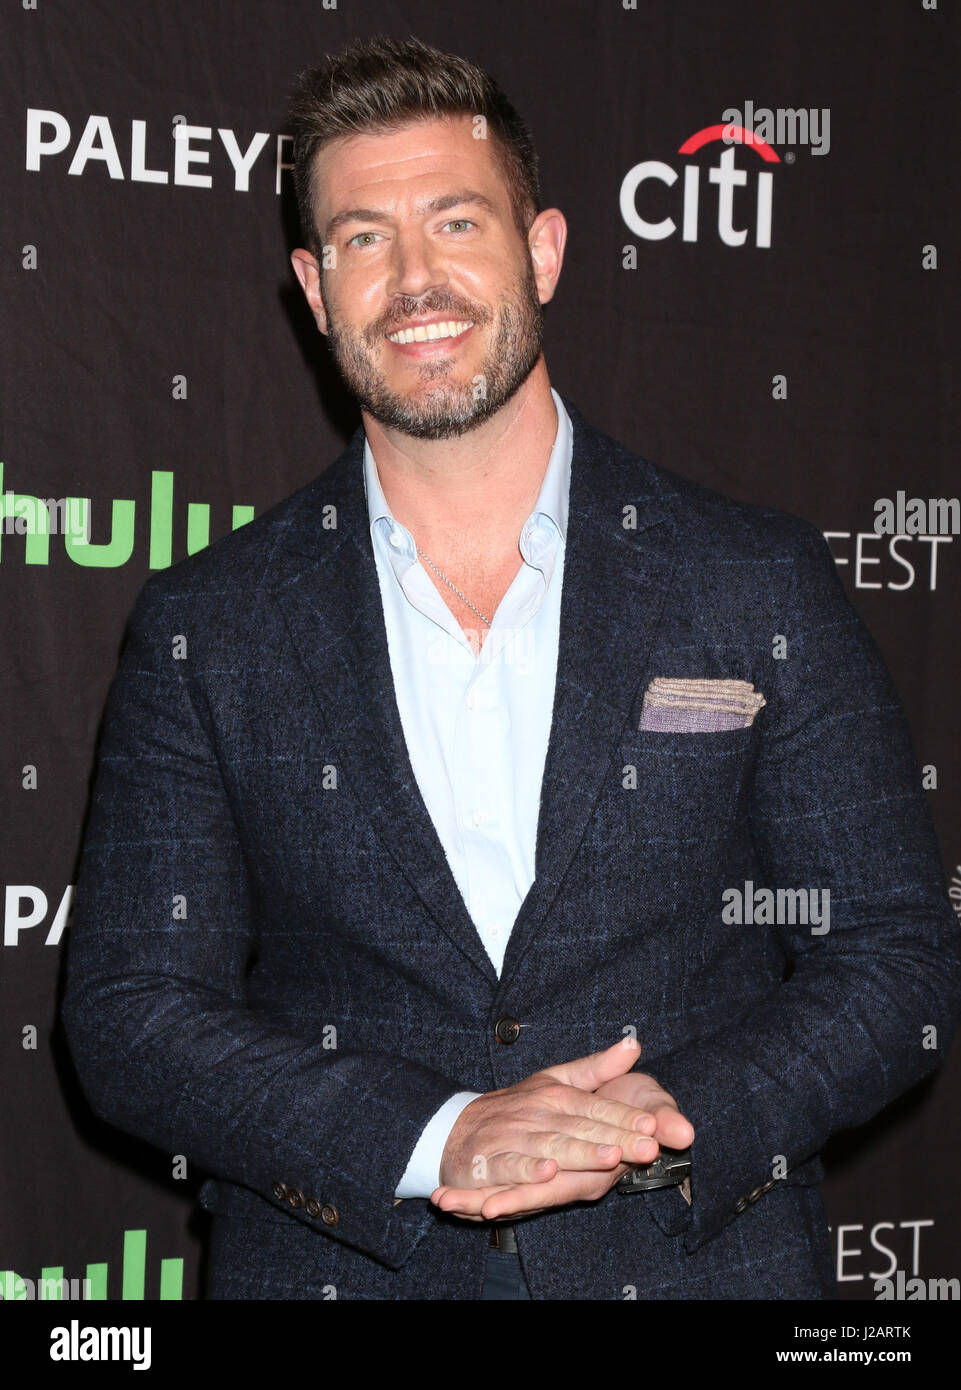 PaleyFest Los Angeles 2017 - 'Scandal' screening  Featuring: Jesse Palmer Where: Los Angeles, California, United States When: 26 Mar 2017 Credit: Nicky Nelson/WENN.com Stock Photo